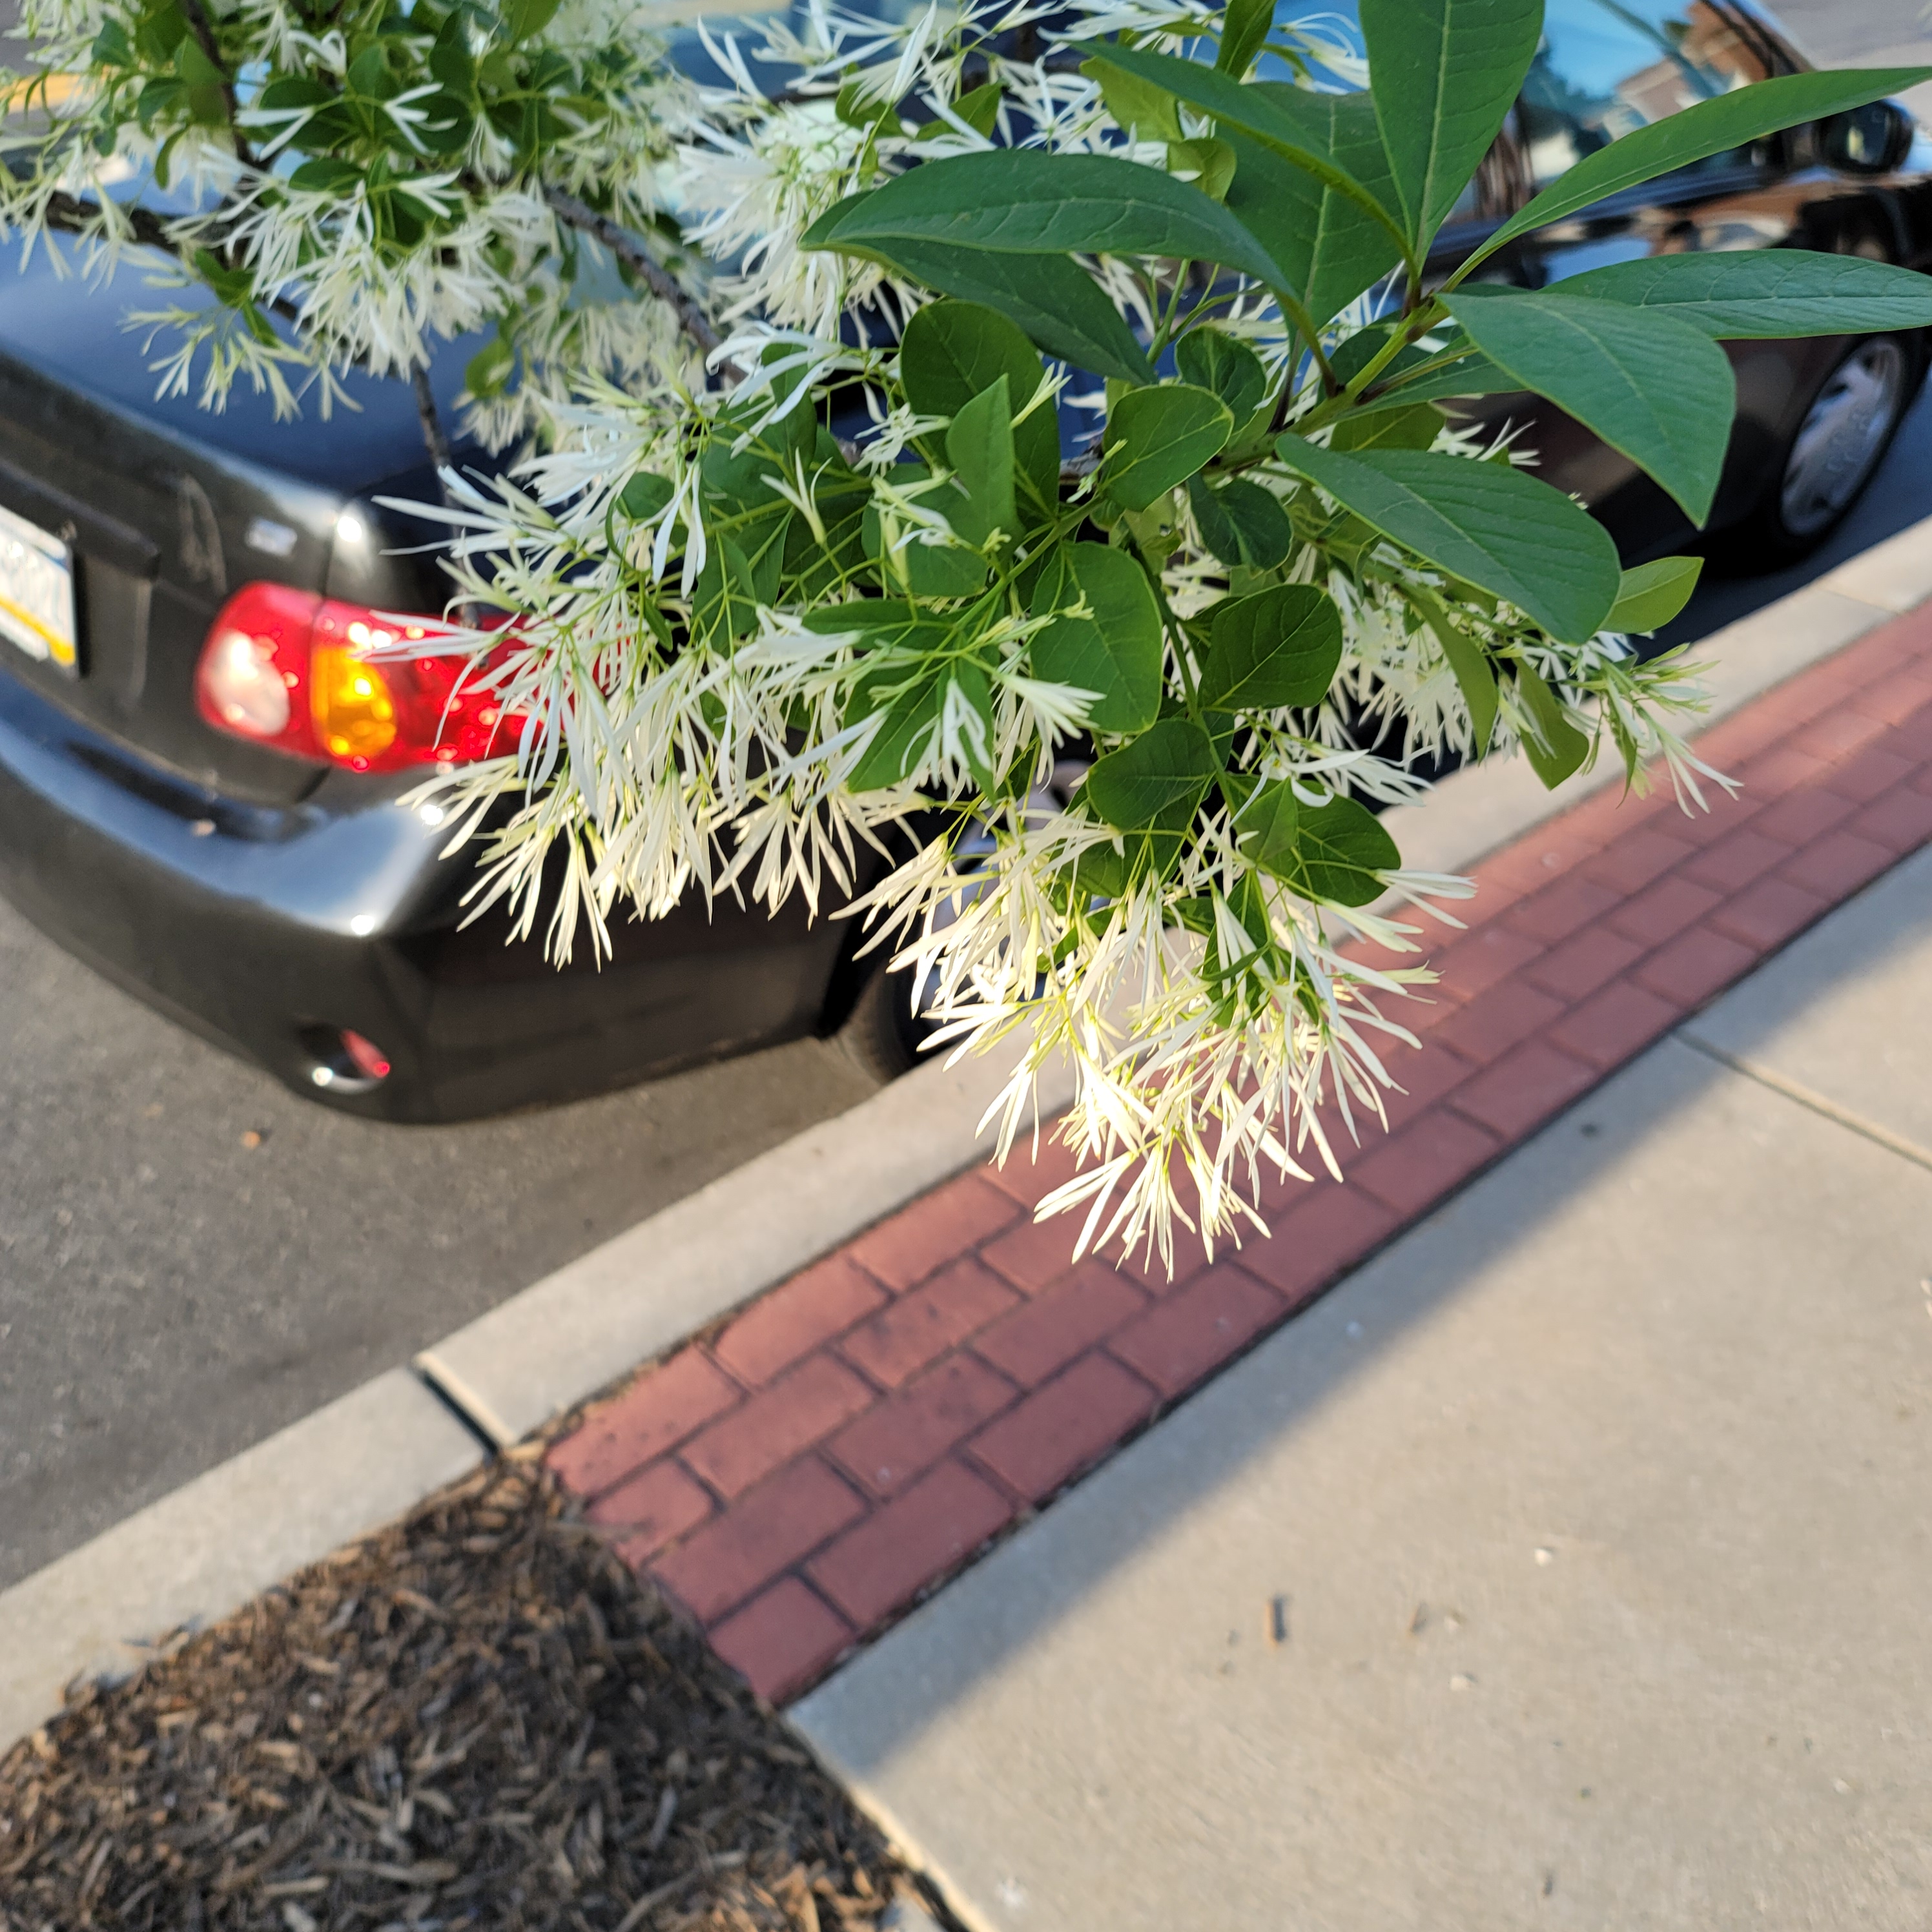 Here is a photo of a small tree with white flowers blooming along the street.